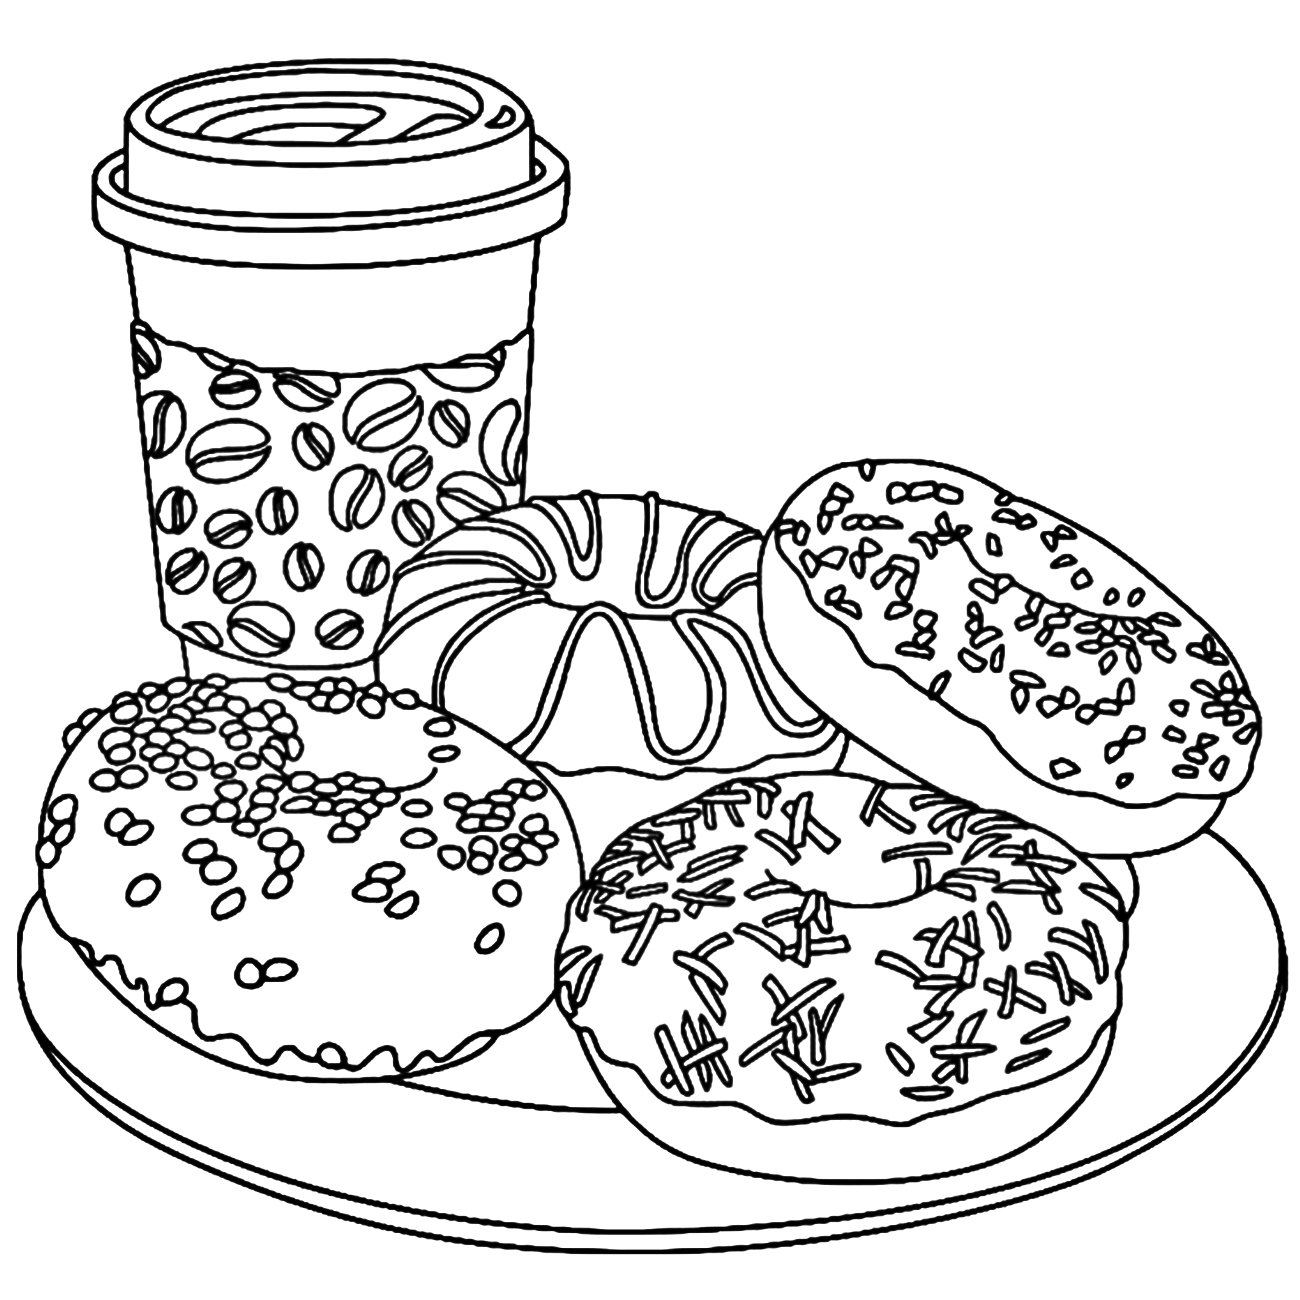 Tempting food and drink coloring book